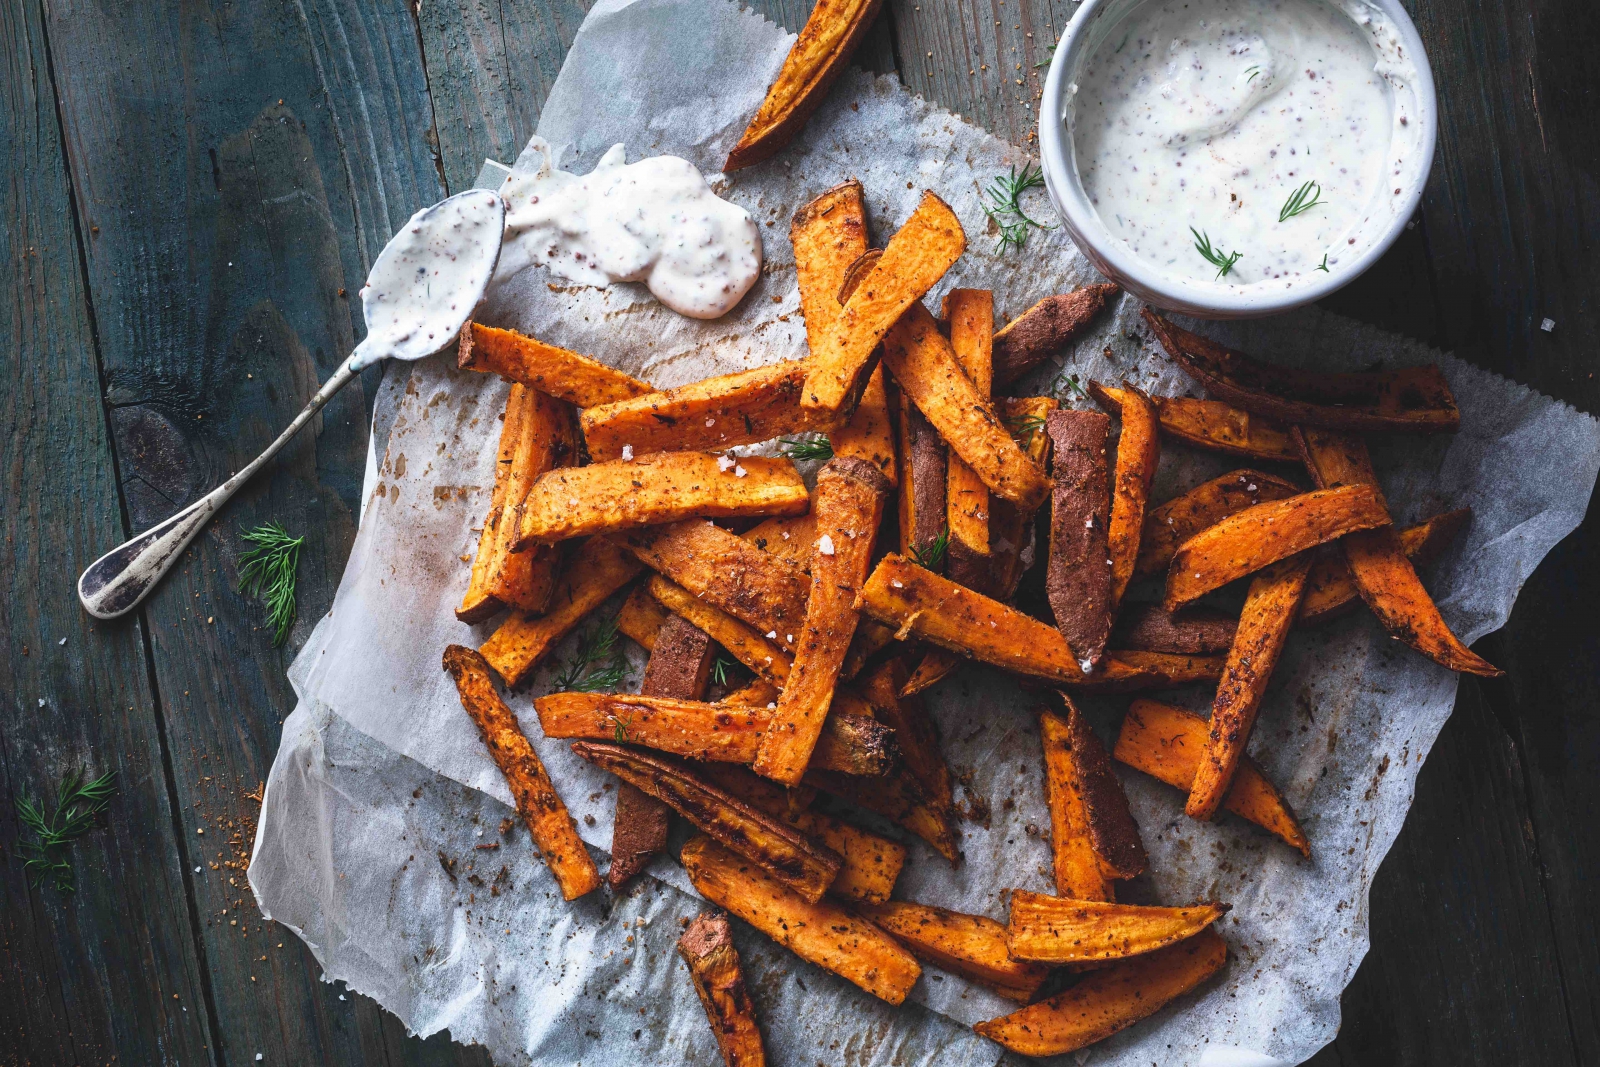 Sweet Potato is an excellent source of slow carbohydrates